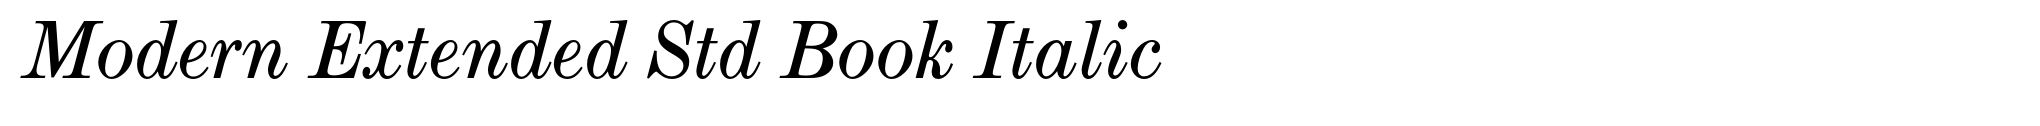 Modern Extended Std Book Italic image